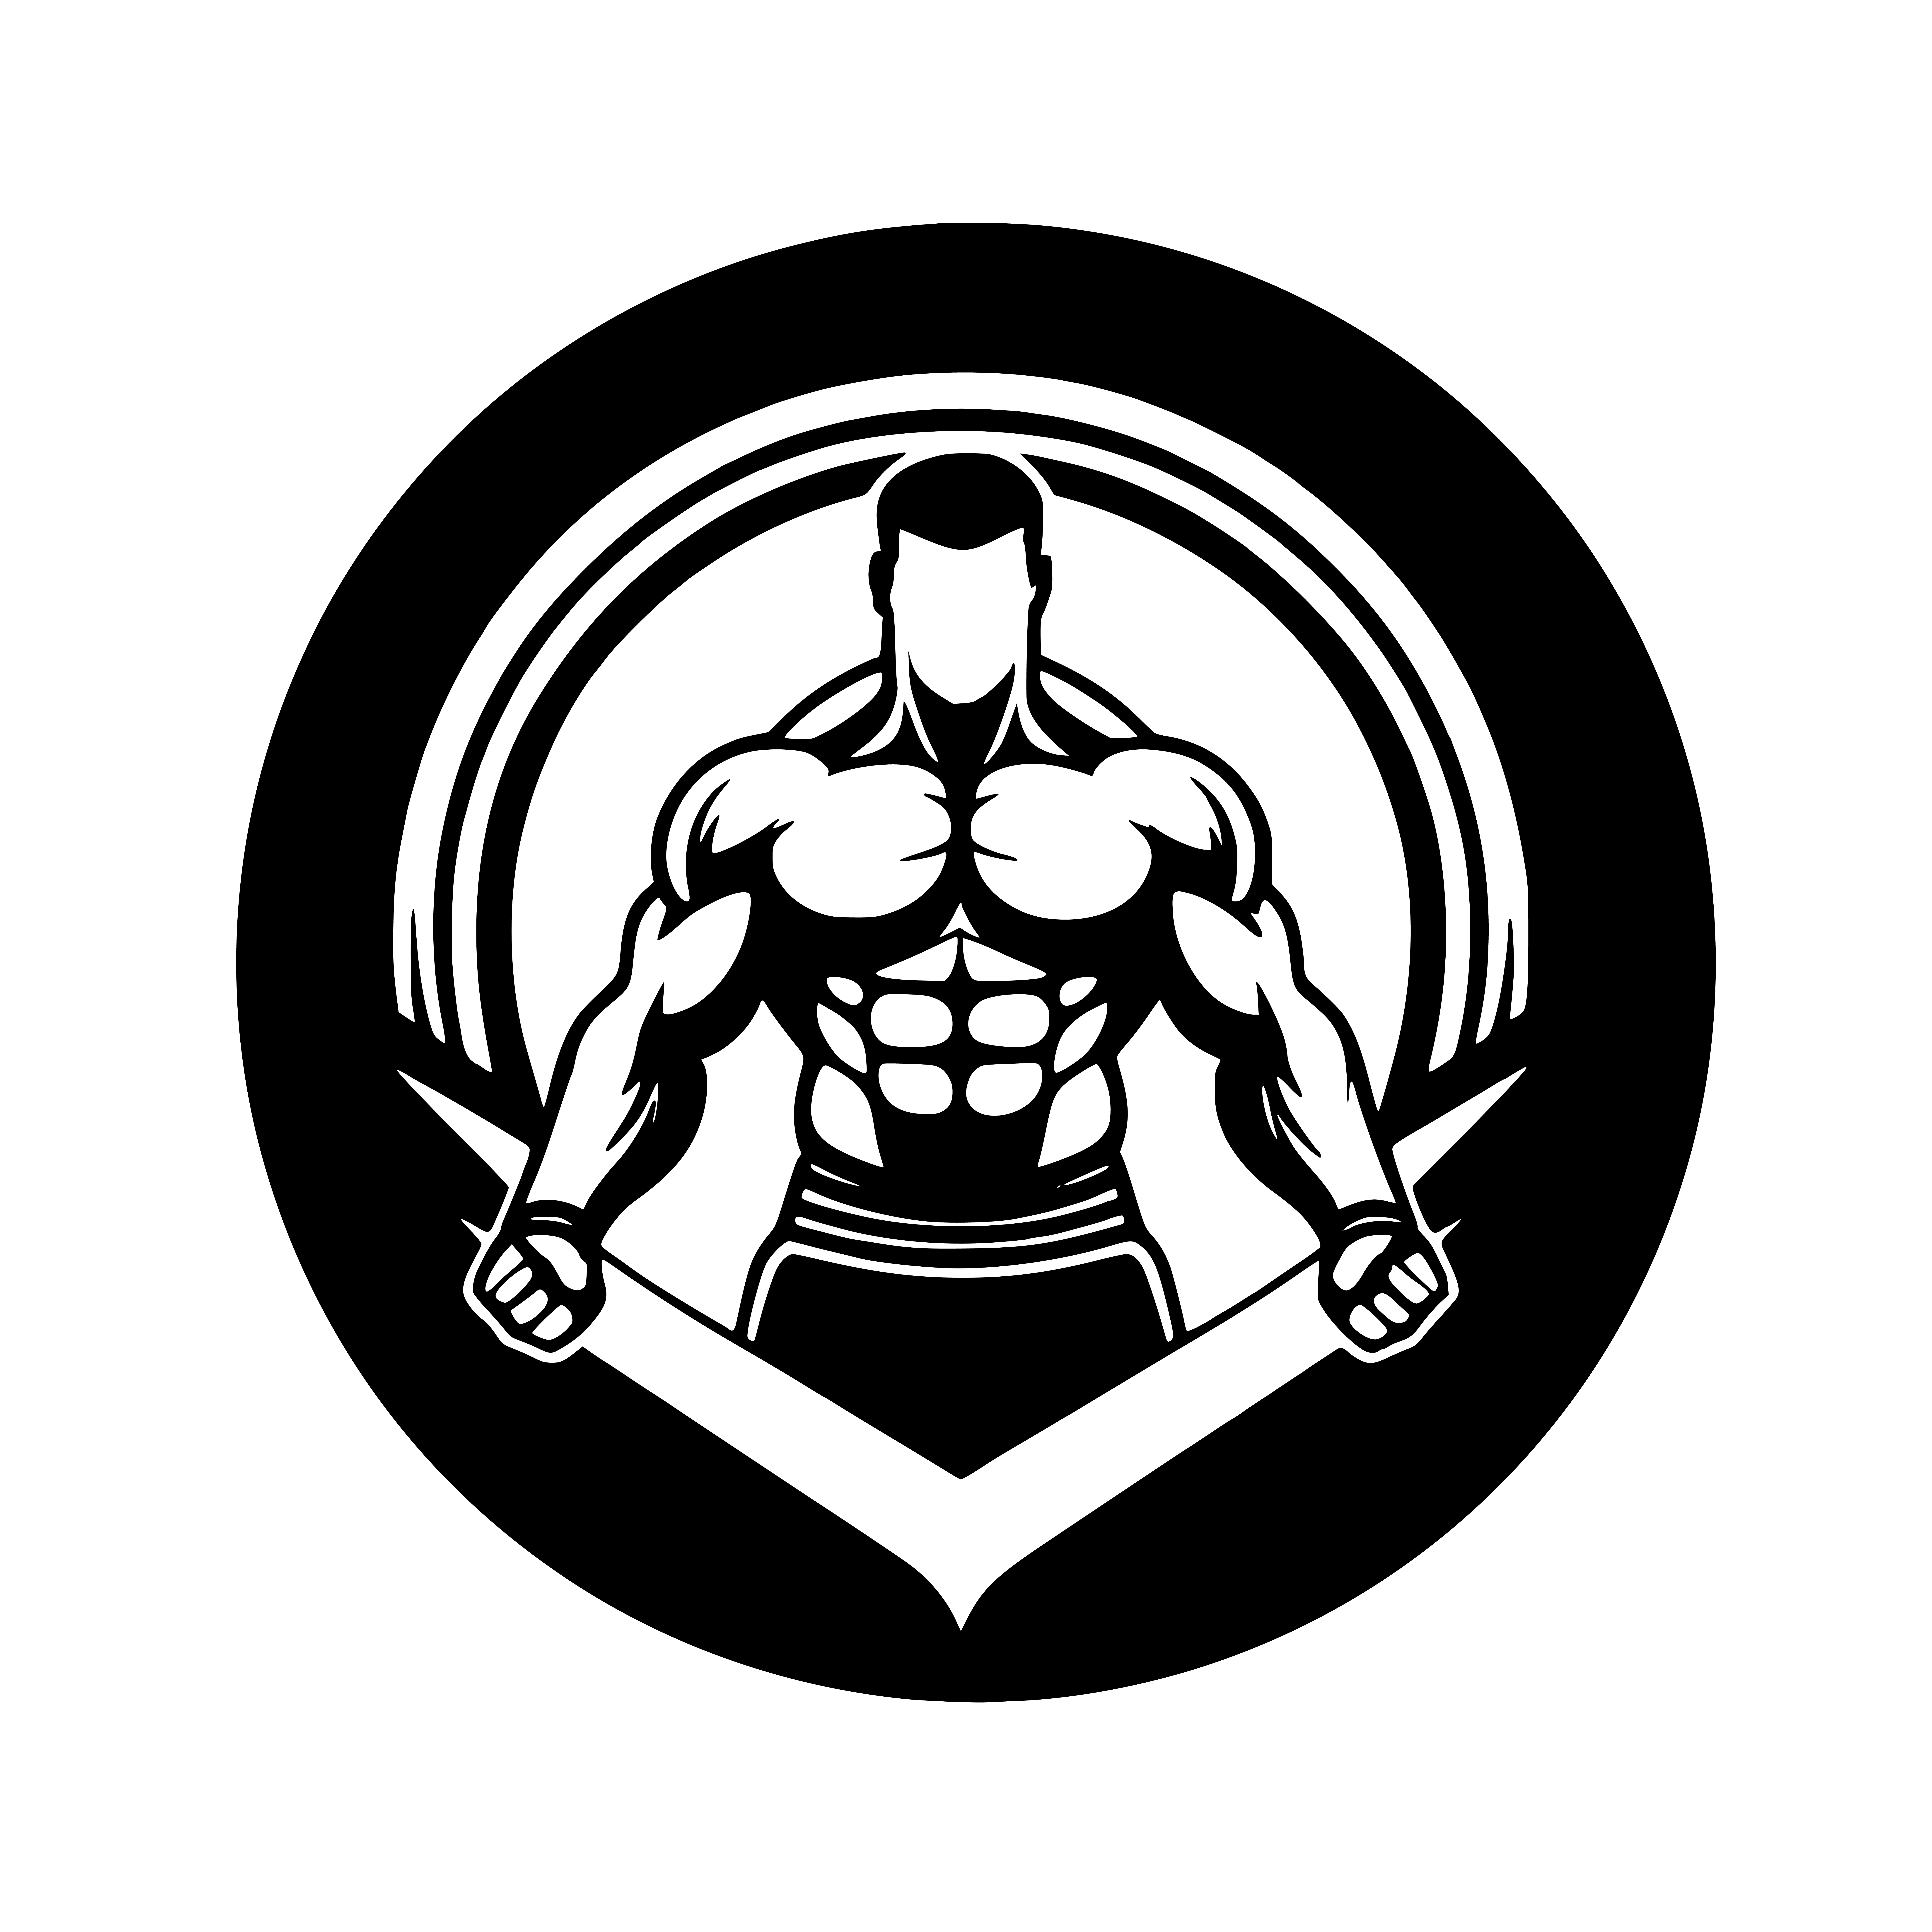 Gym and fitness silhouette design